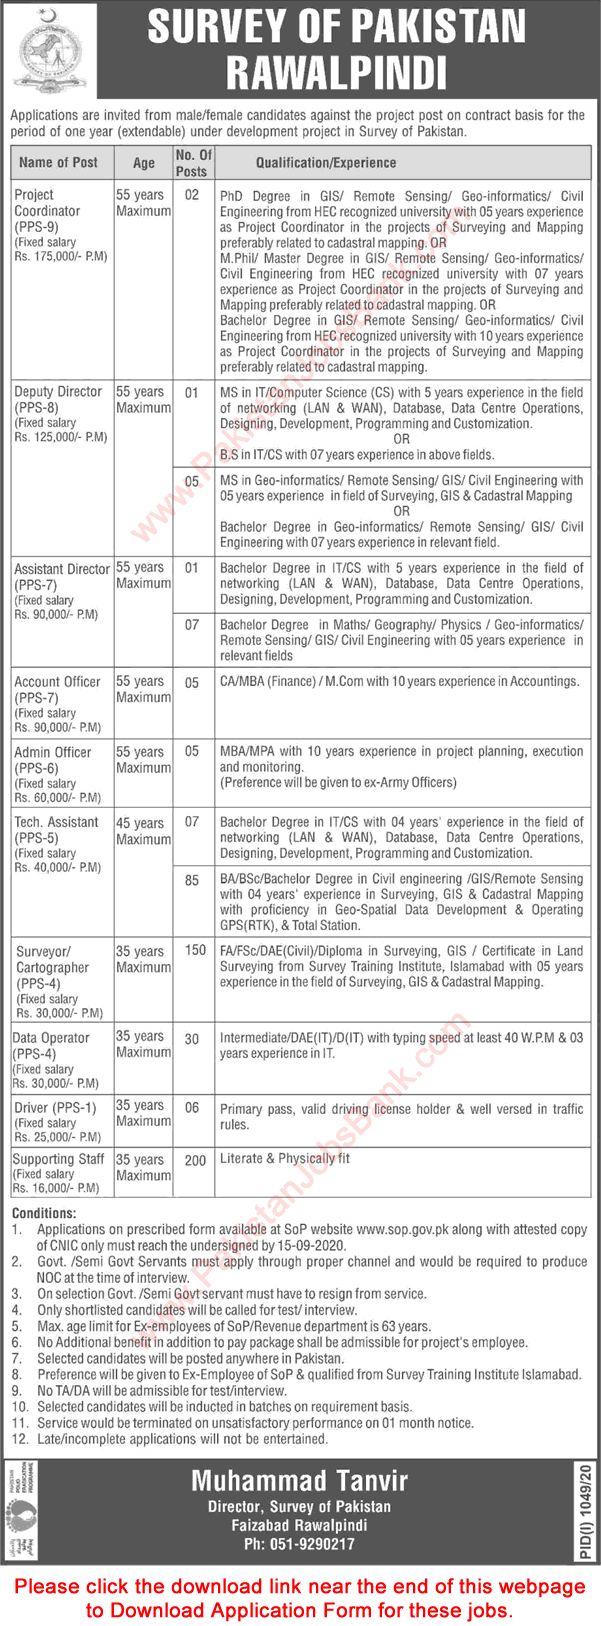 Survey of Pakistan Jobs 2020 August / September Application Form Surveyors, Supporting Staff & Others Latest